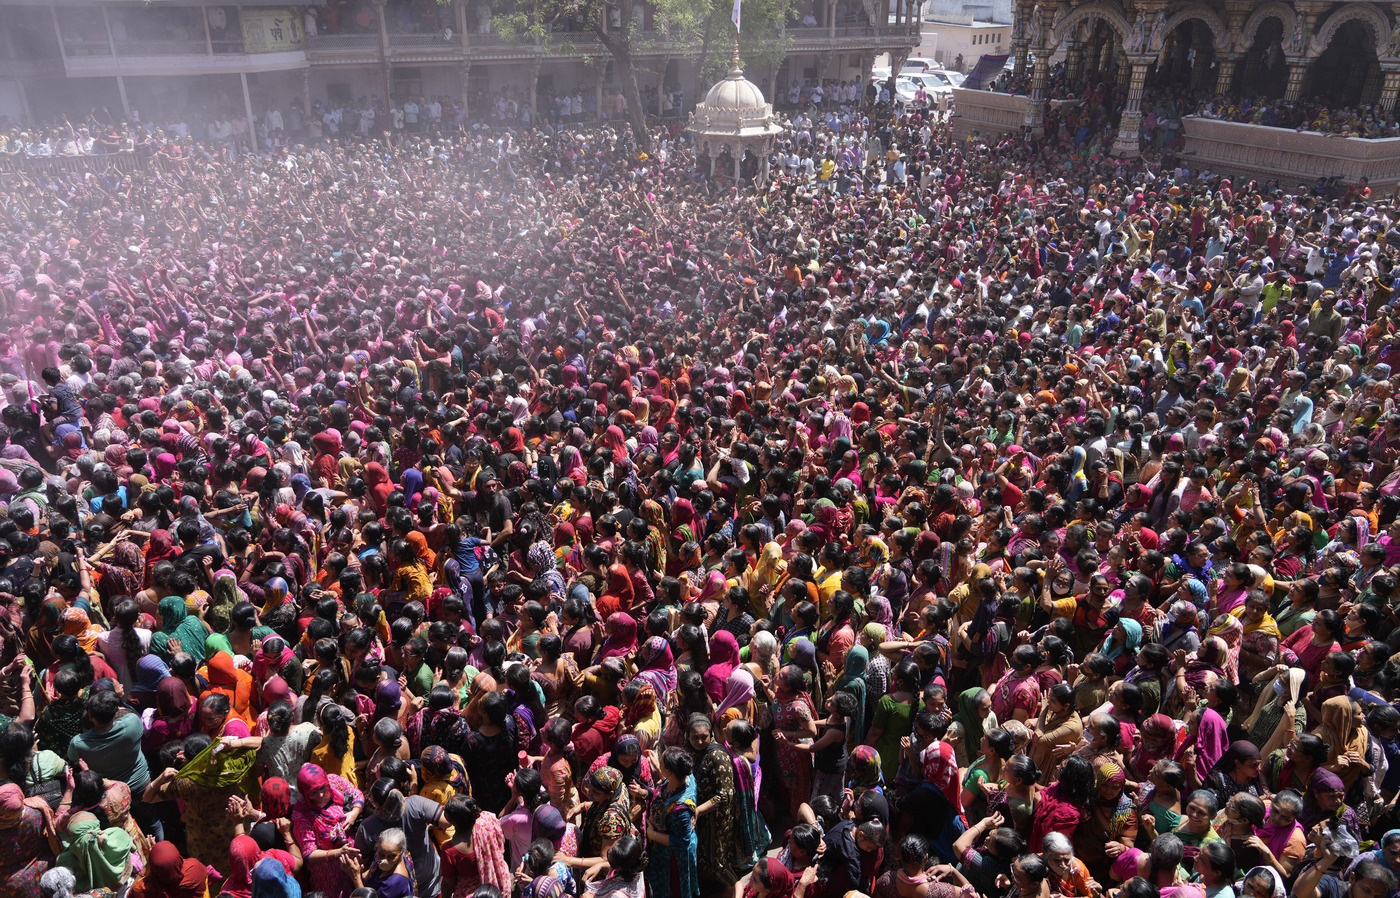 Devotees cheer as colored powder and water is sprayed on them during celebrations marking Holi at the Kalupur Swaminarayan temple in Ahmedabad, India, Friday, March 18, 2022. Holi, the Hindu festival of colors, also marks the advent of spring. (AP Photo/Ajit Solanki)